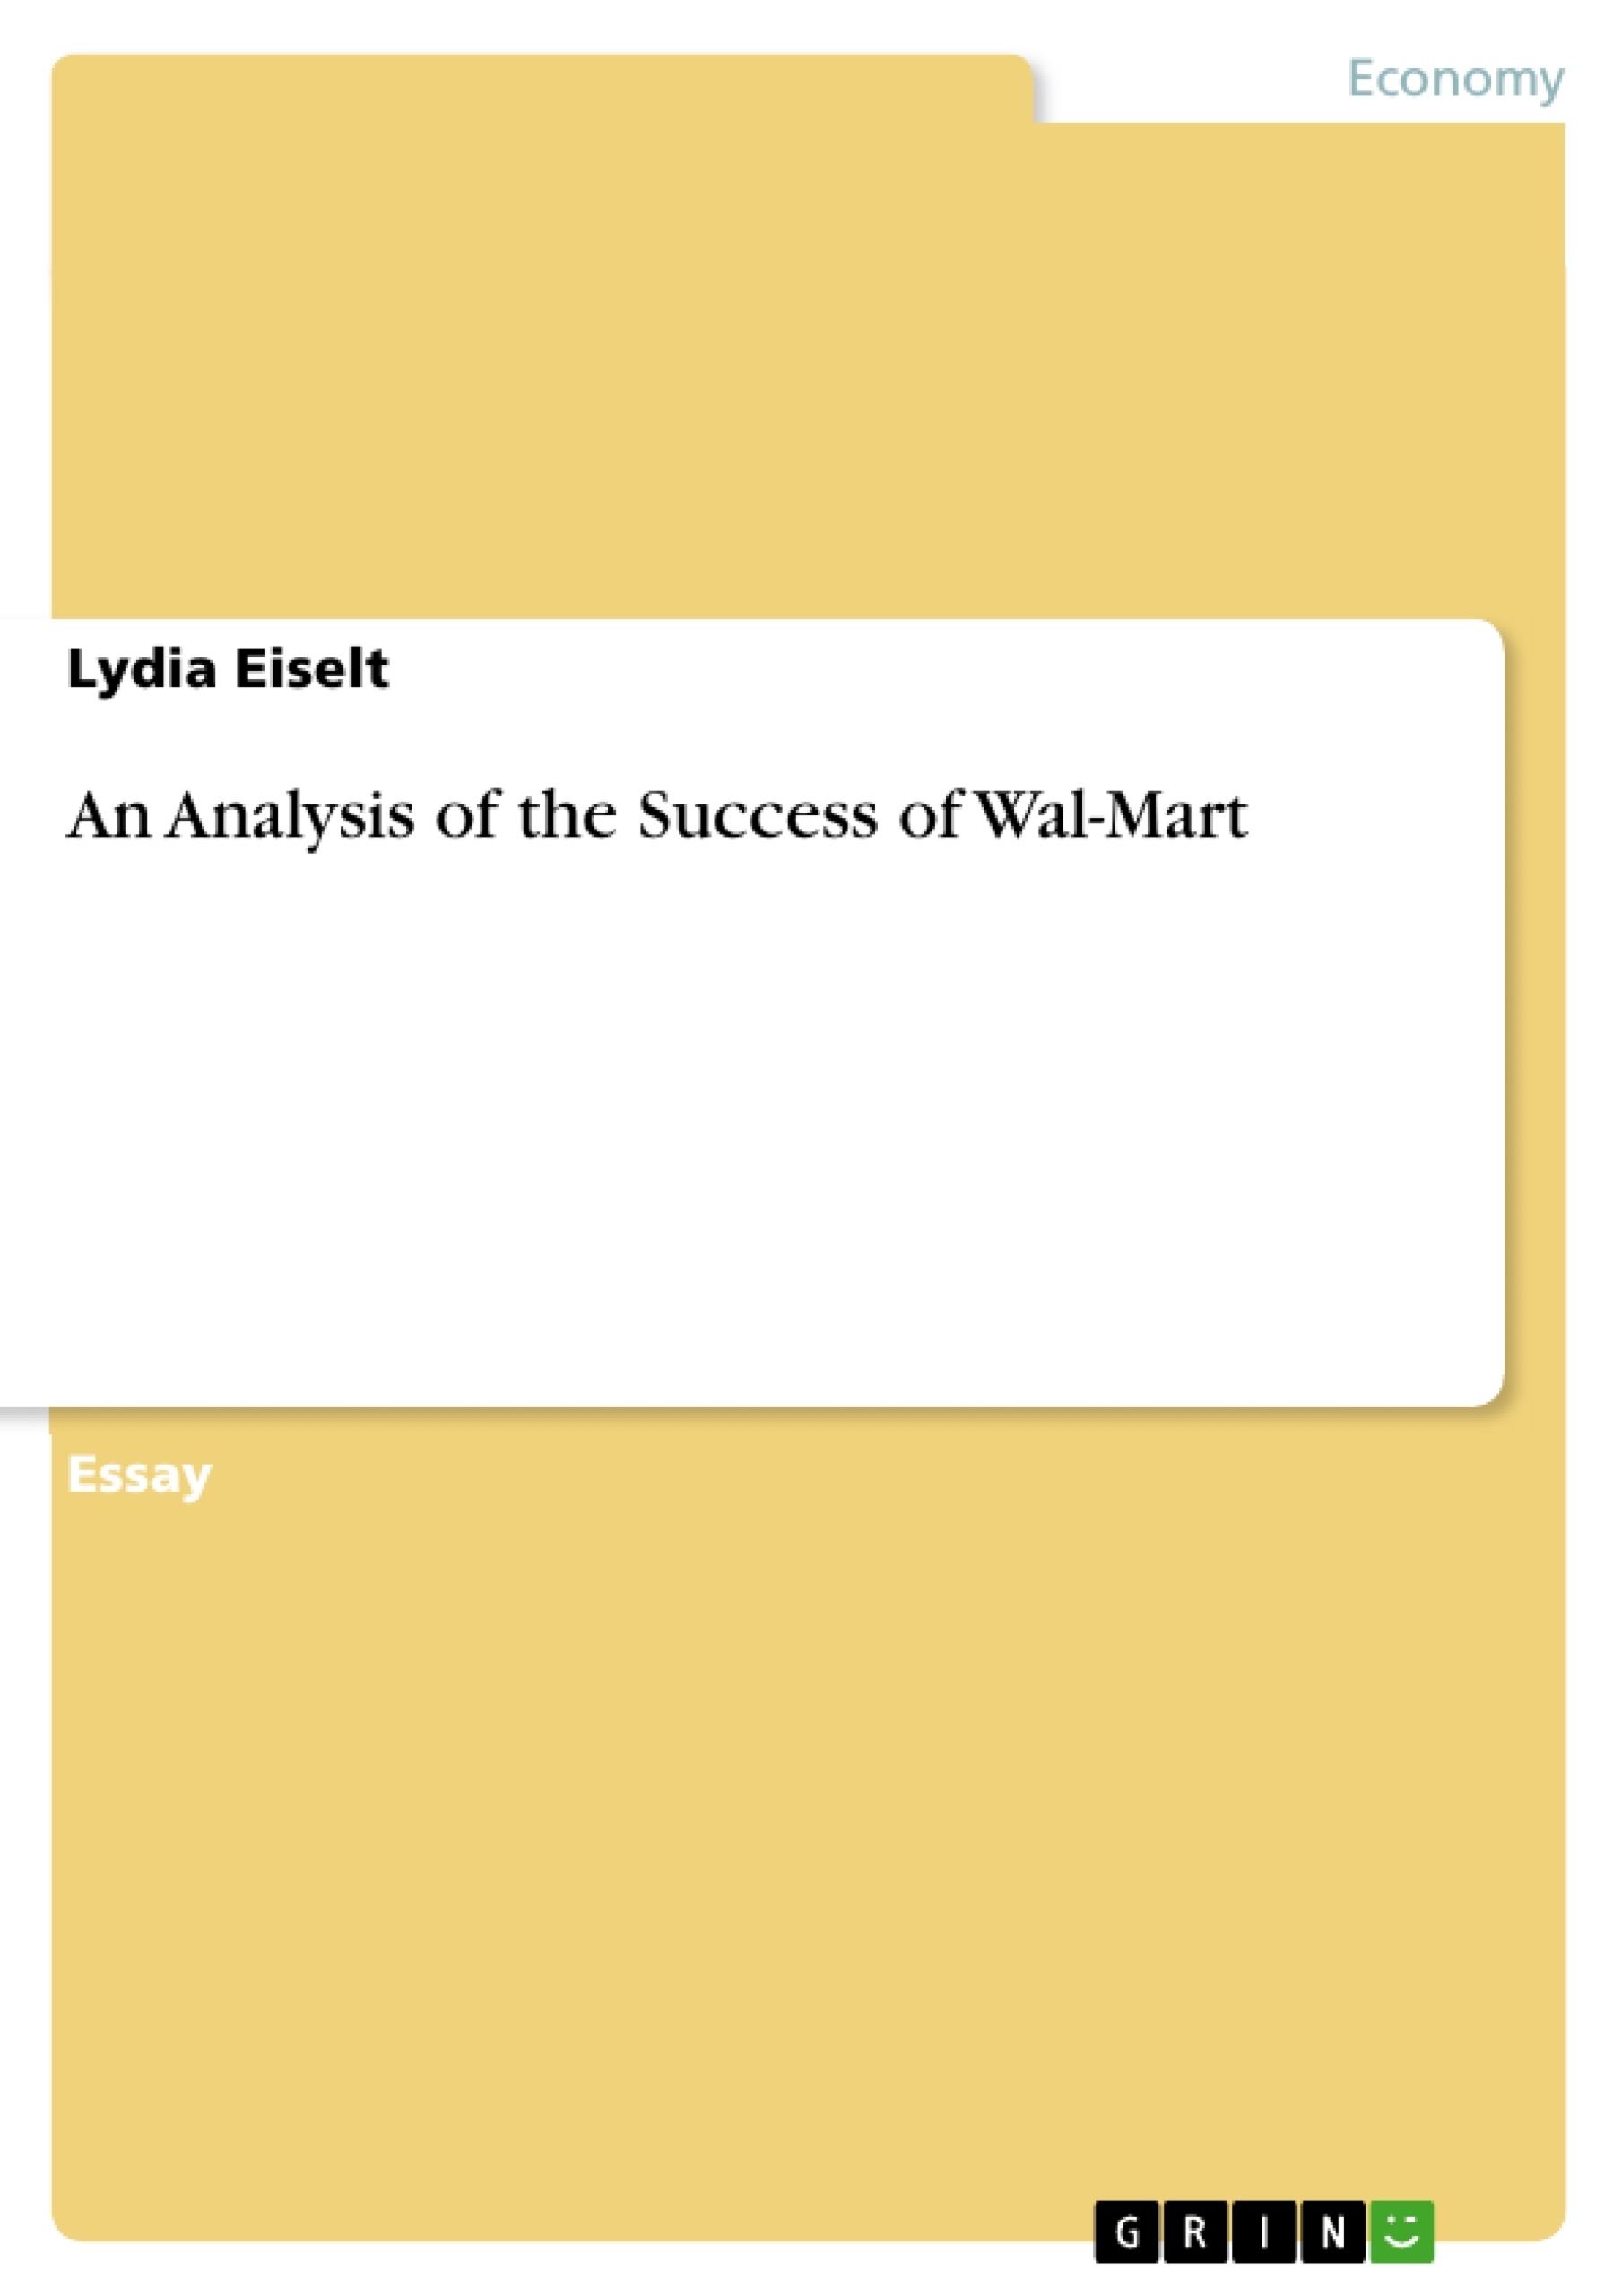 Title: An Analysis of the Success of Wal-Mart